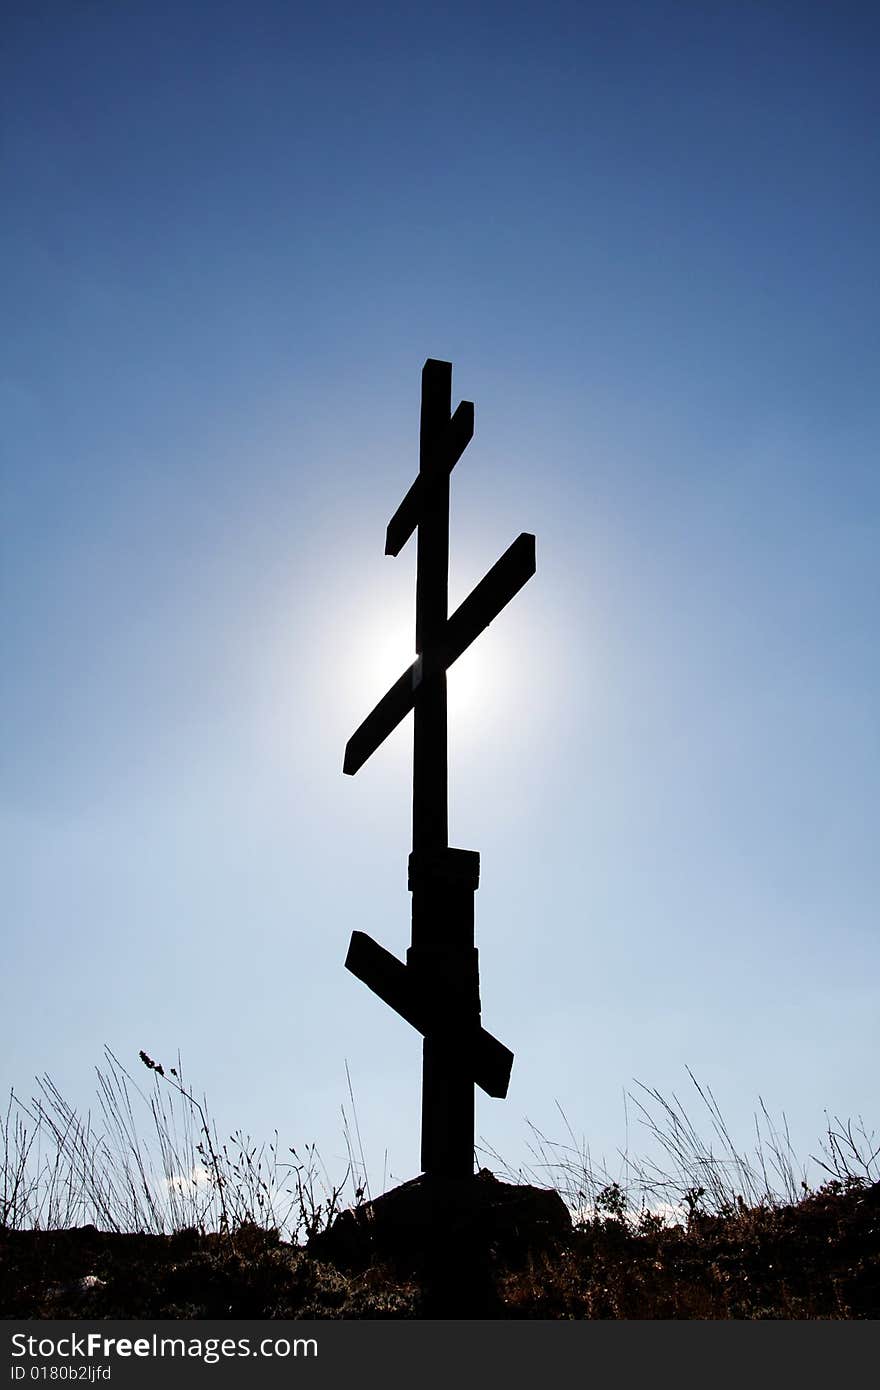 Eight-pointed [Russian] cross in mountains. Eight-pointed [Russian] cross in mountains